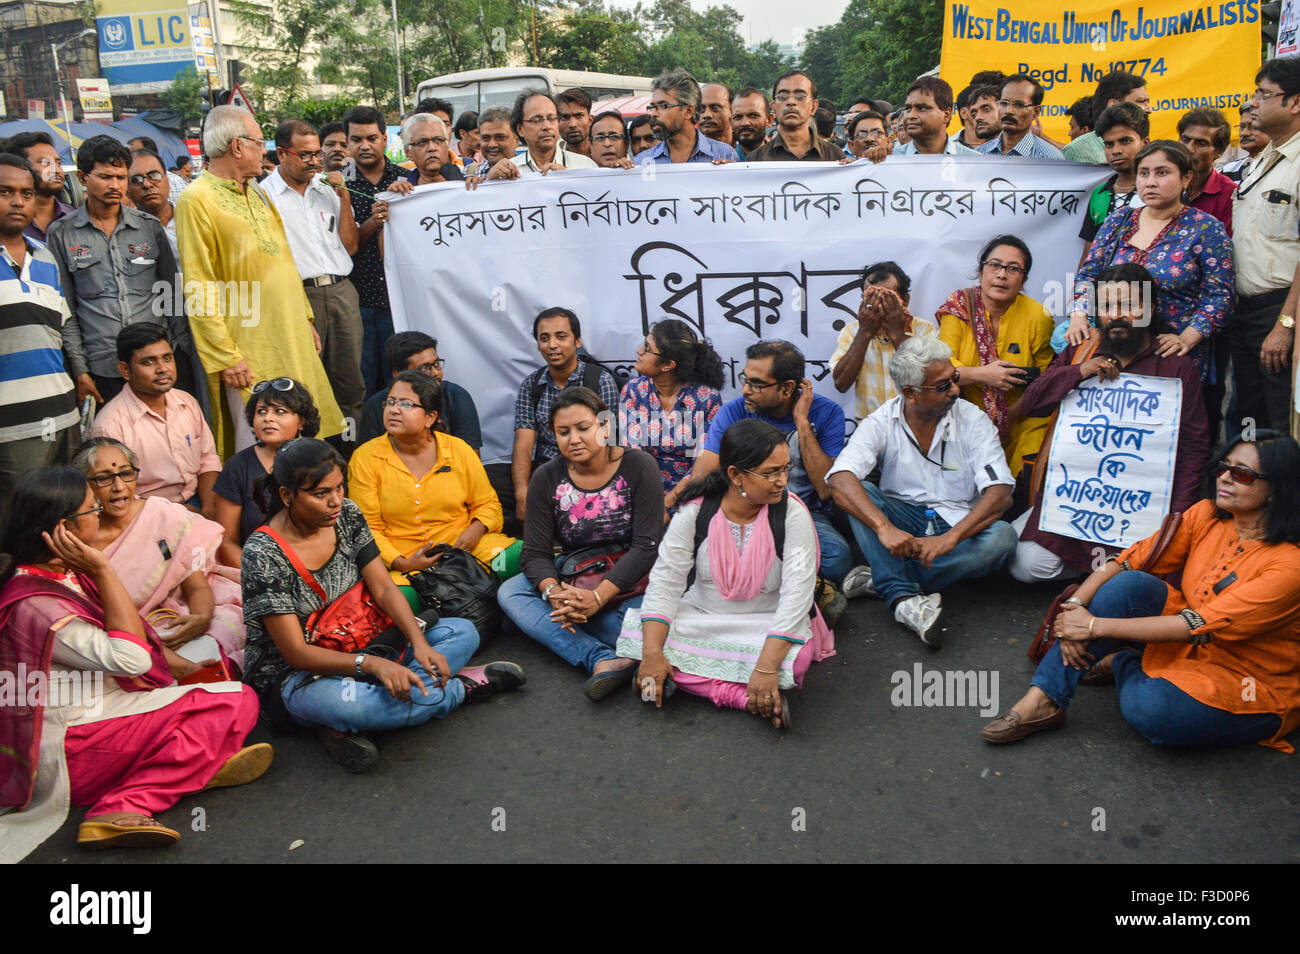 Kolkata, India. 05th Oct, 2015. The Calcutta Press Club organised a rally on Monday to protest the brutal assault on media. There are around thousands of media persons participated in rally to condemn the attack. Photojournalists put their cameras down during protest march at Kolkata. At least 21 journalists were barbarically thrashed and their equipment broken allegedly by goons of ruling Trinamool party while taking reports on rampanr rigging in poll booths across Bidhan Nagar and Salt Lake area. Credit:  PACIFIC PRESS/Alamy Live News Stock Photo